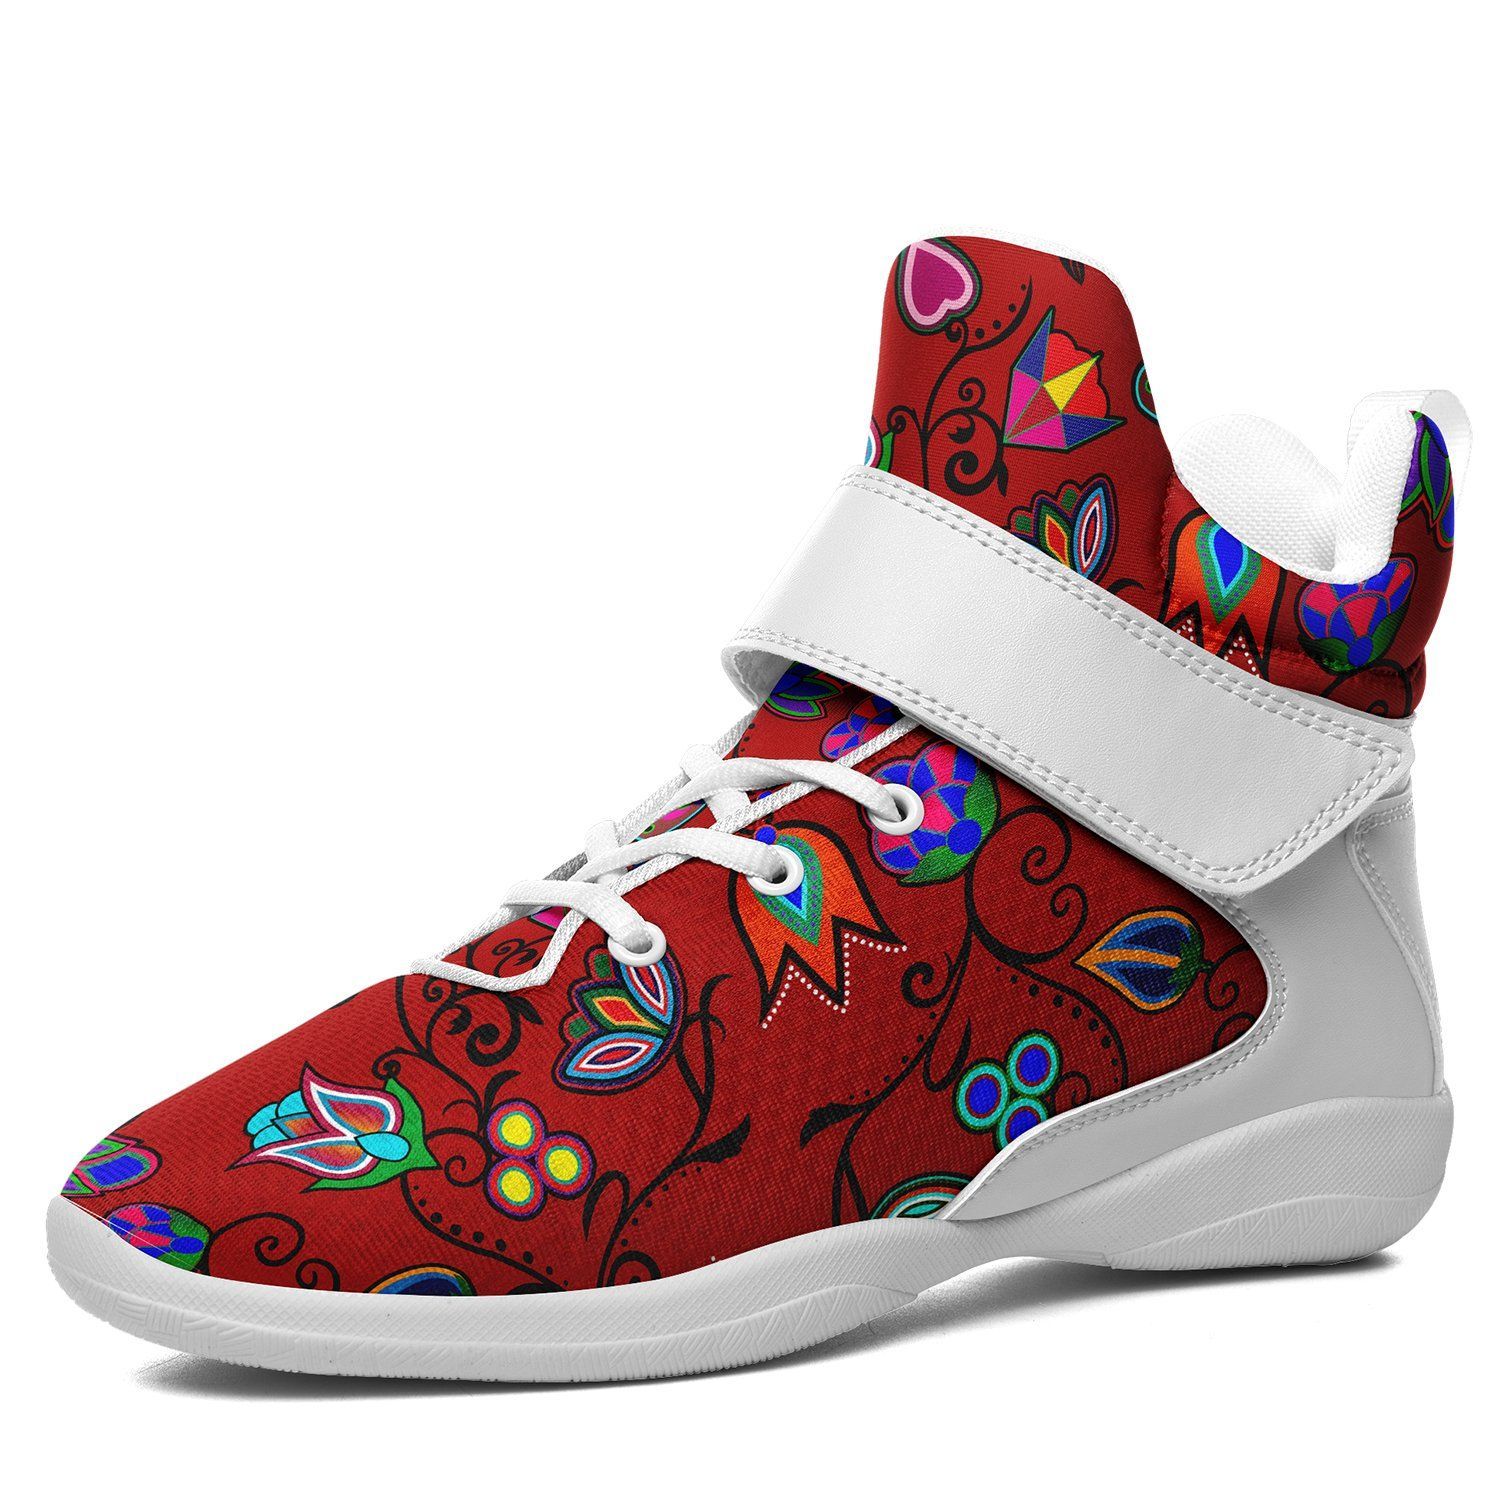 Indigenous Paisley Dahlia Ipottaa Basketball / Sport High Top Shoes - White Sole 49 Dzine US Men 7 / EUR 40 White Sole with White Strap 